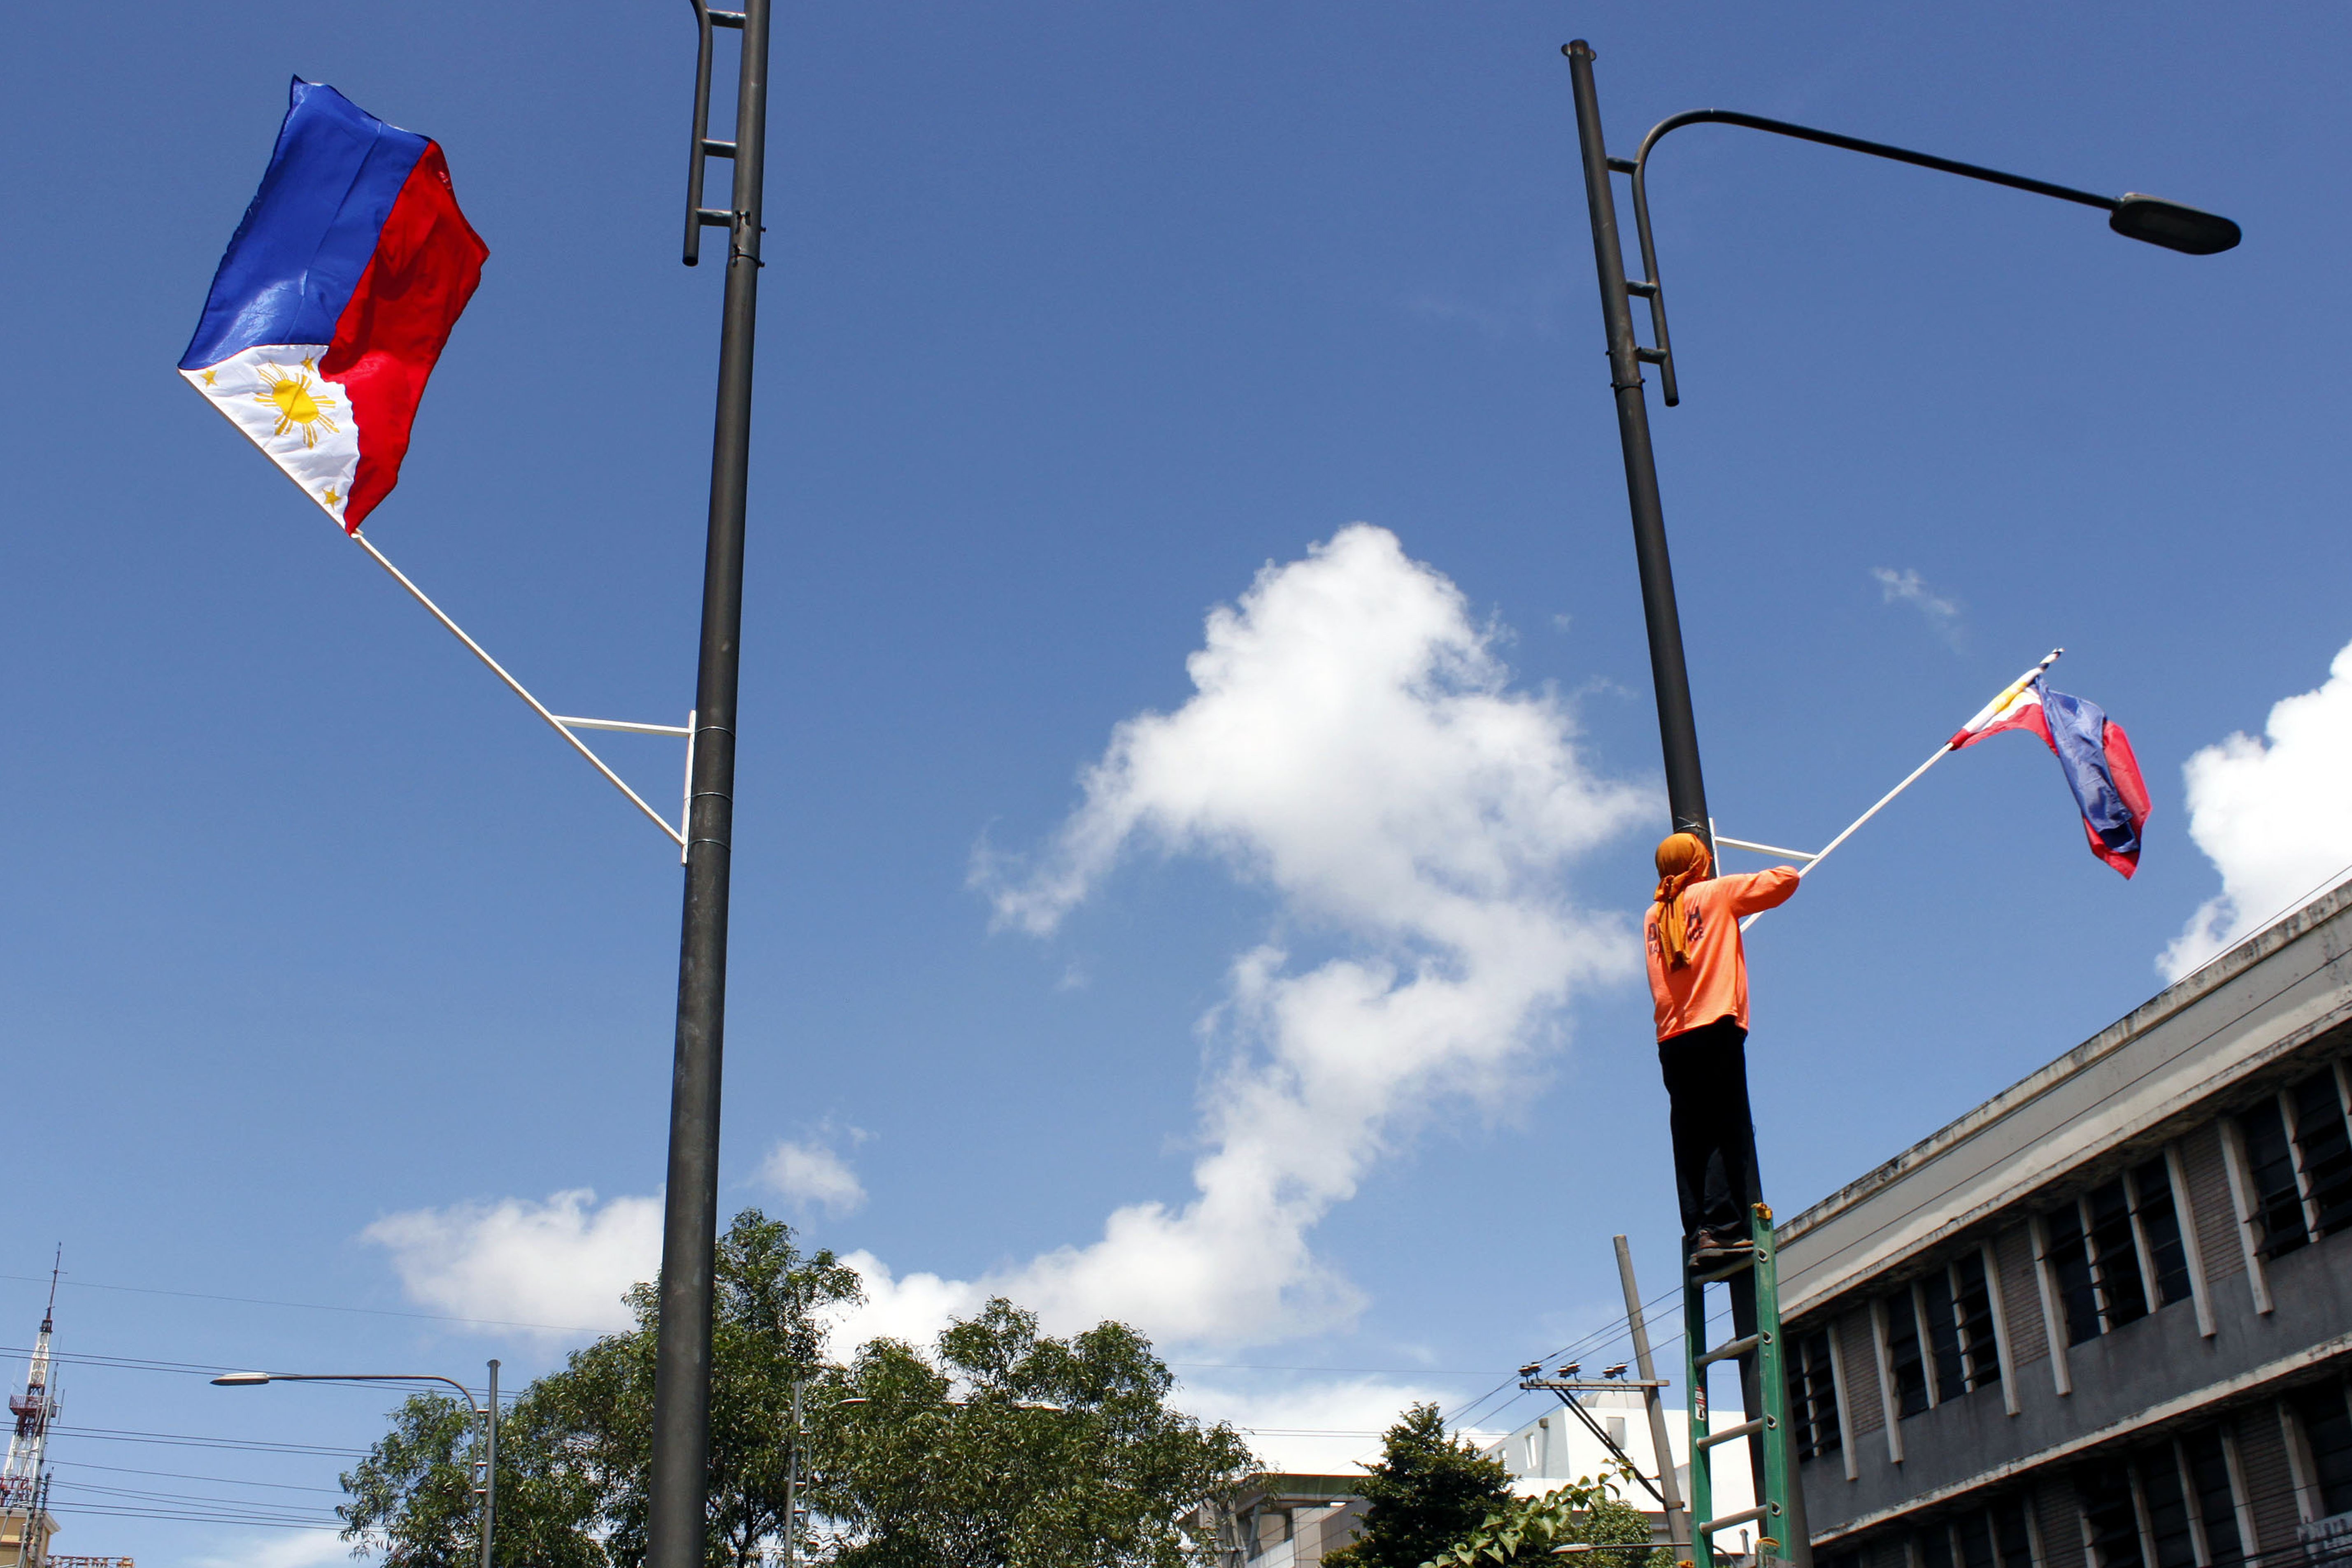 10 DAYS TO GO. Preparations are underway for the celebration of Philippine independence day.